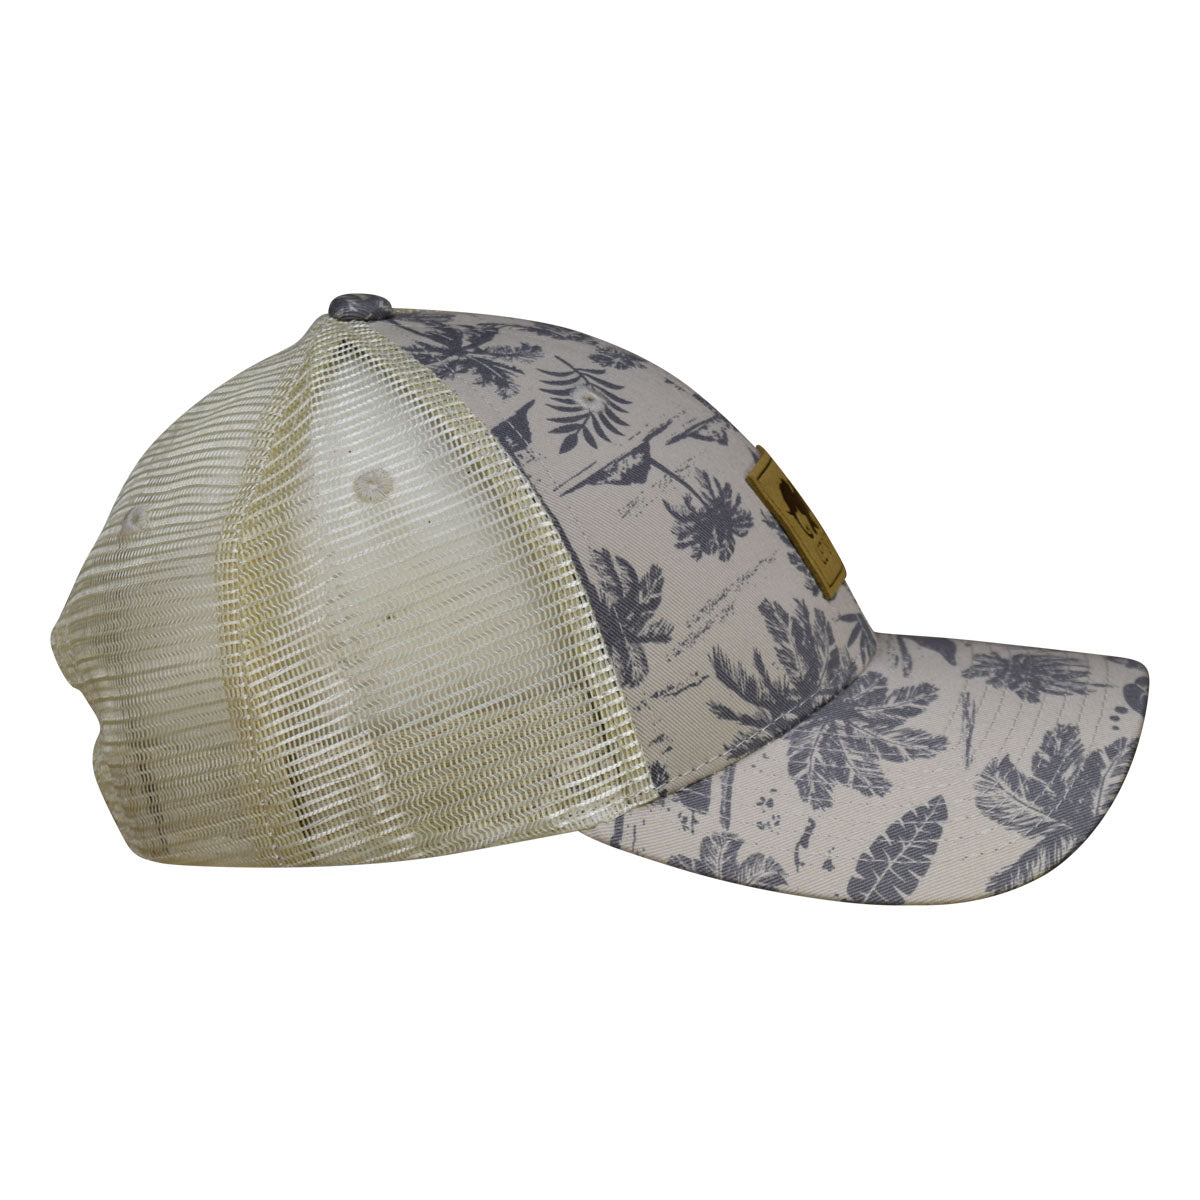 Tropical Elephant Trucker Hat by LET'S BE IRIE - Palm Trees, Tan and G